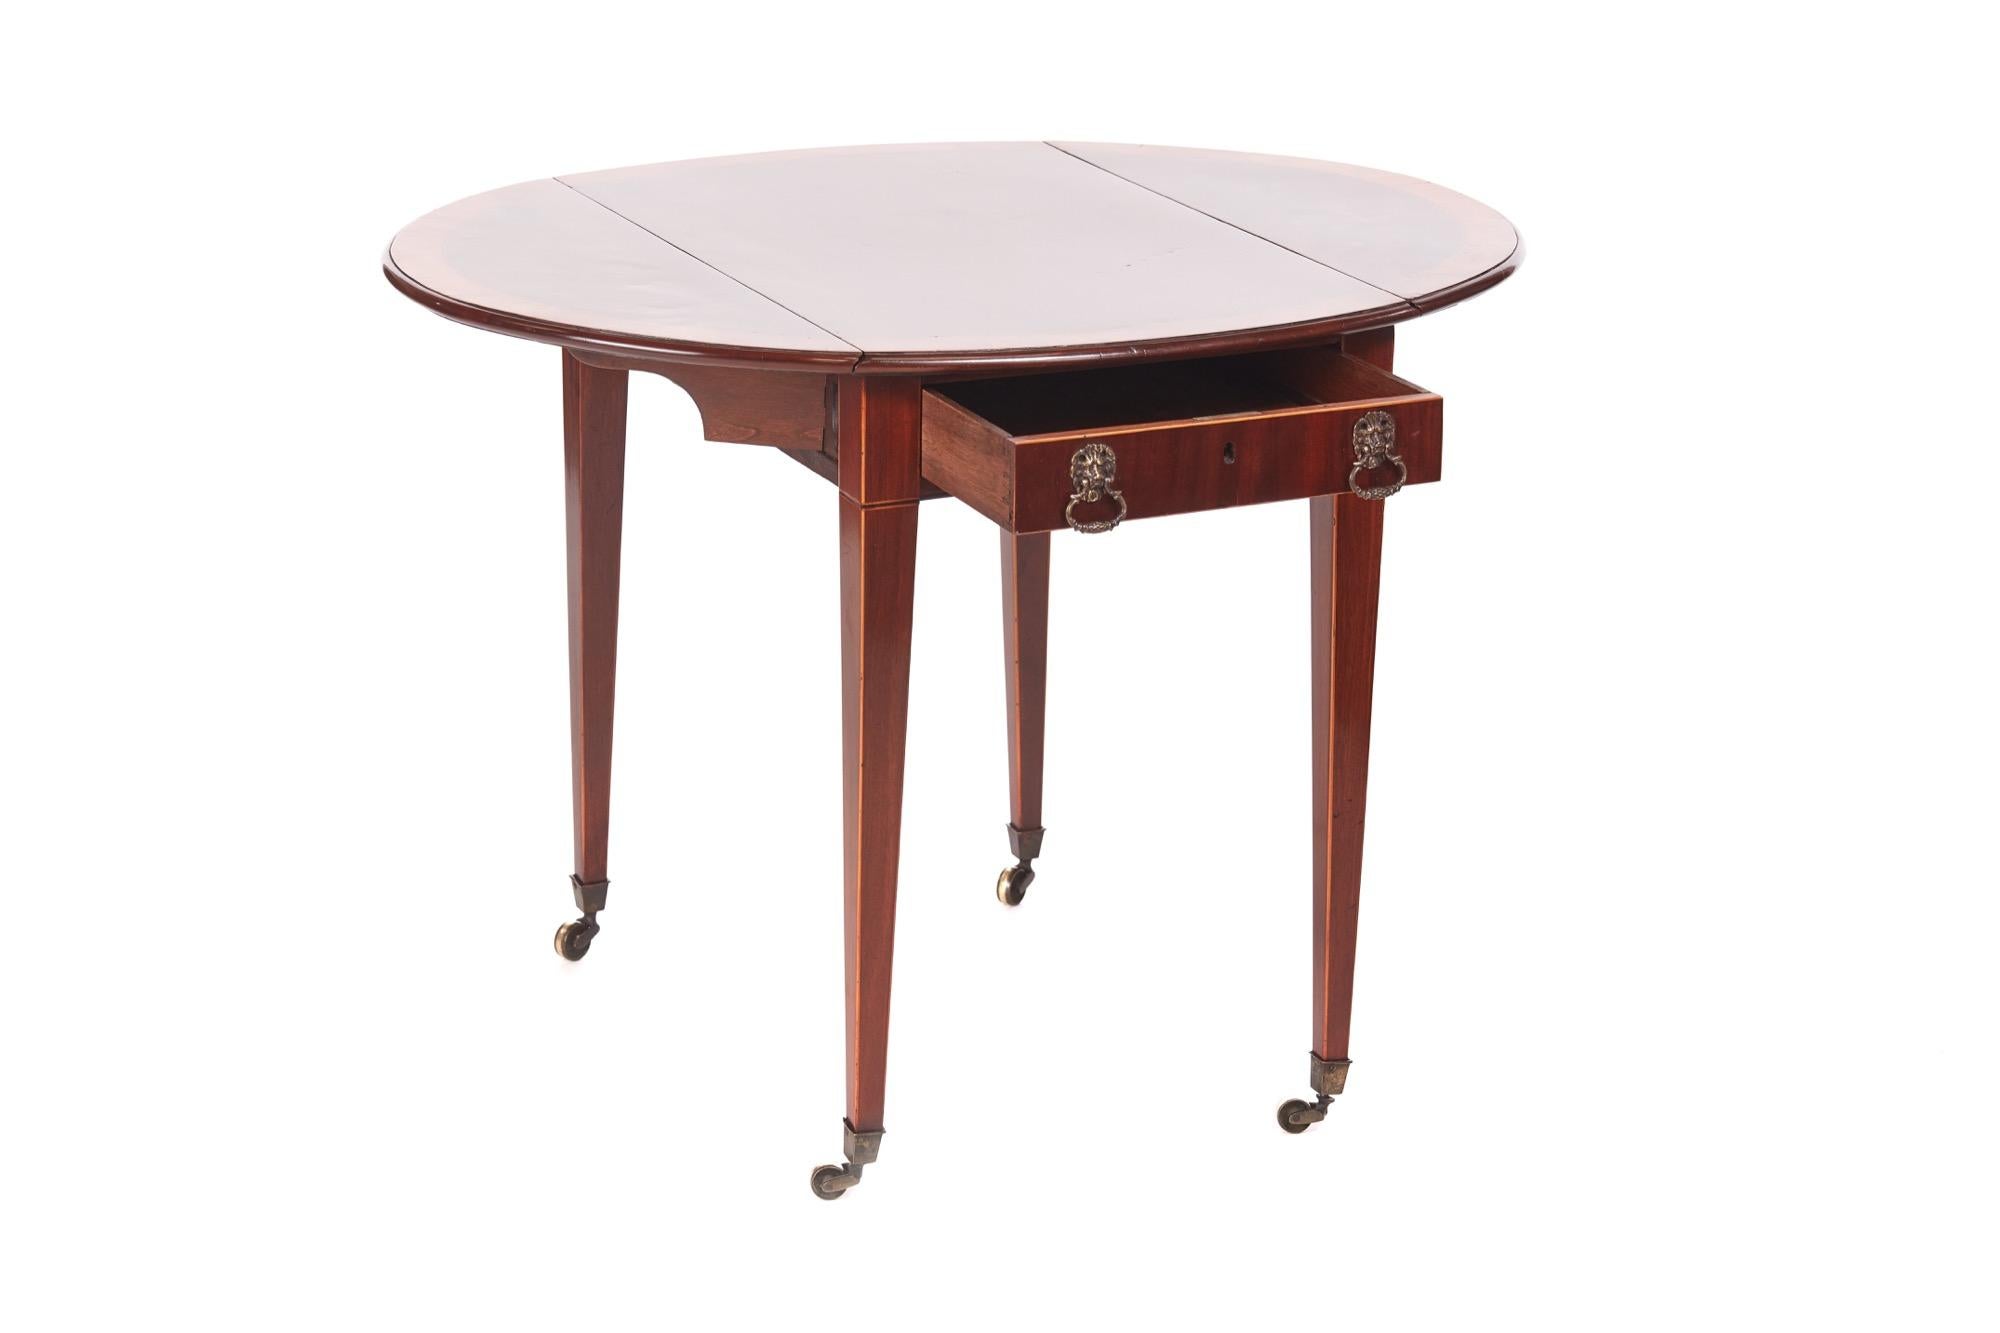 Antique Sheraton period inlaid mahogany pembroke table which has a quality mahogany top crossbanded in satinwood, two oval drop leaves, one drawer and one dummy drawer to the frieze with original brass handles. It stands on four square tapering legs